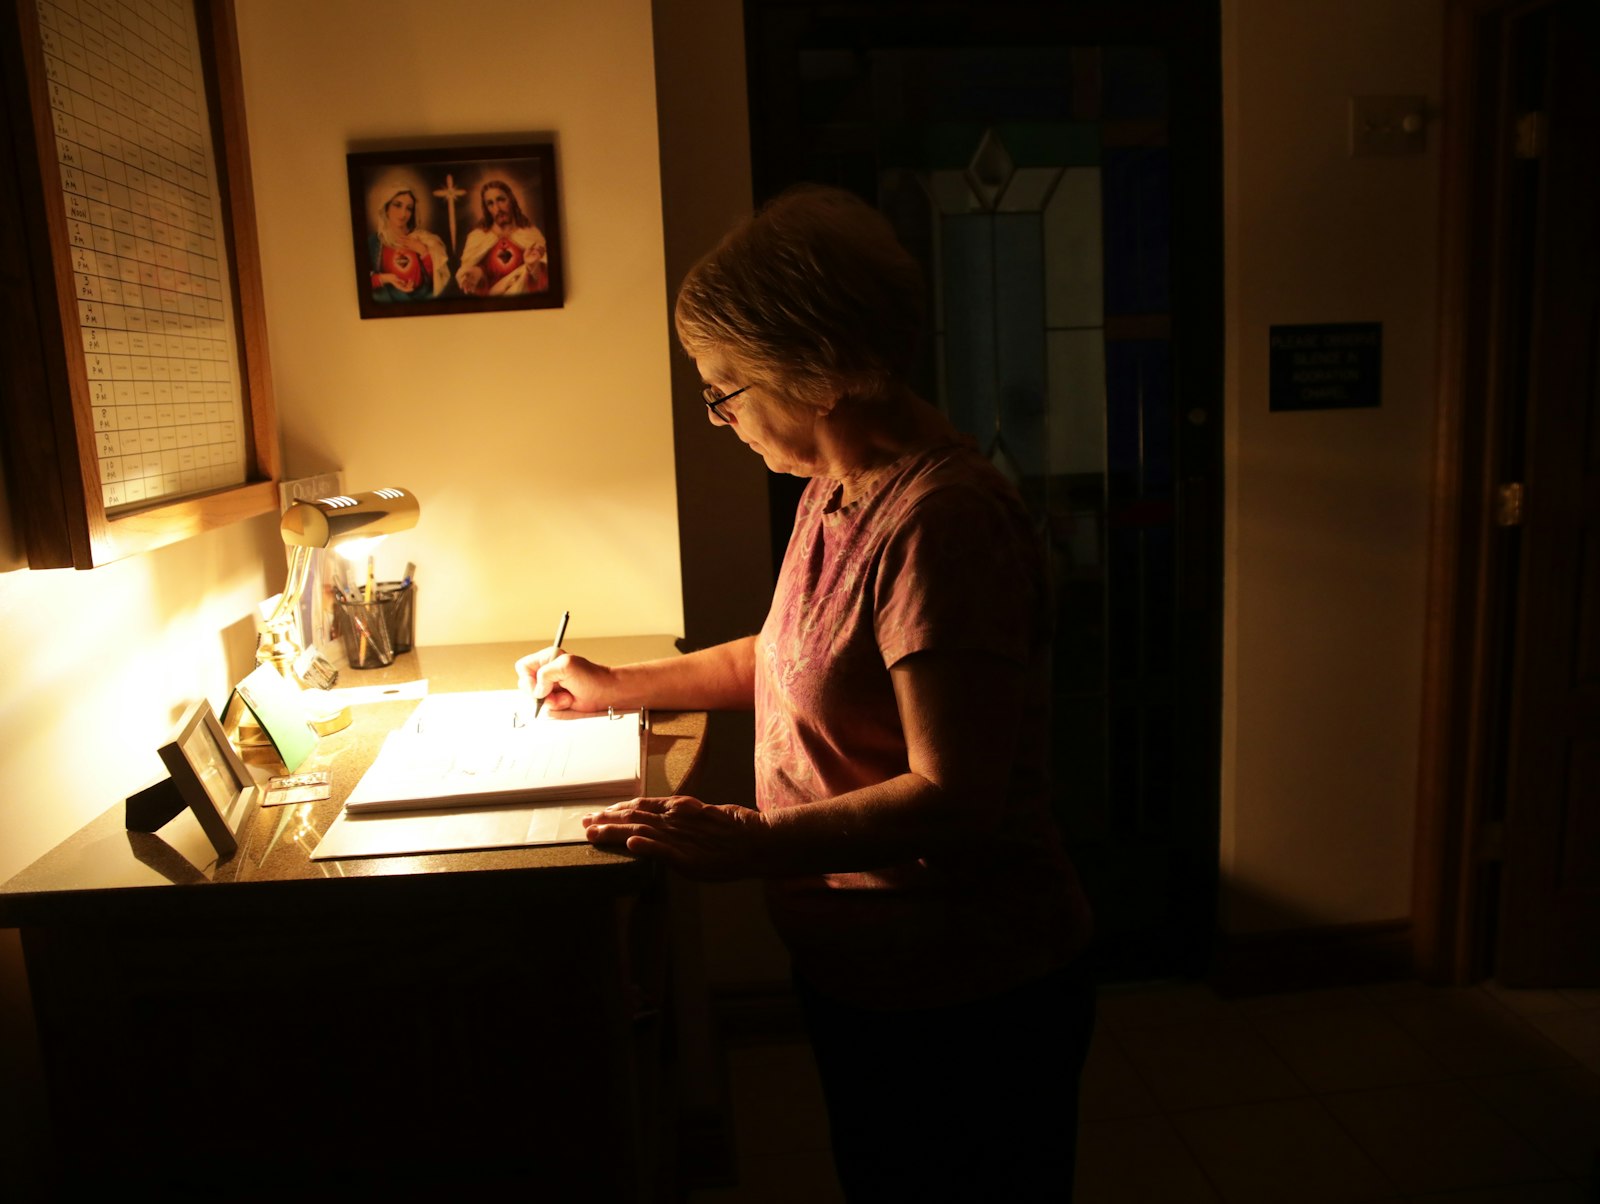 Karen Flint signs in to St. Charles Borromeo's adoration chapel for her time slot. Those who wish to make use of the chapel don't have to sign up -- anyone can just show up, she says -- but parishes do appreciate volunteers keeping vigil with the Lord.